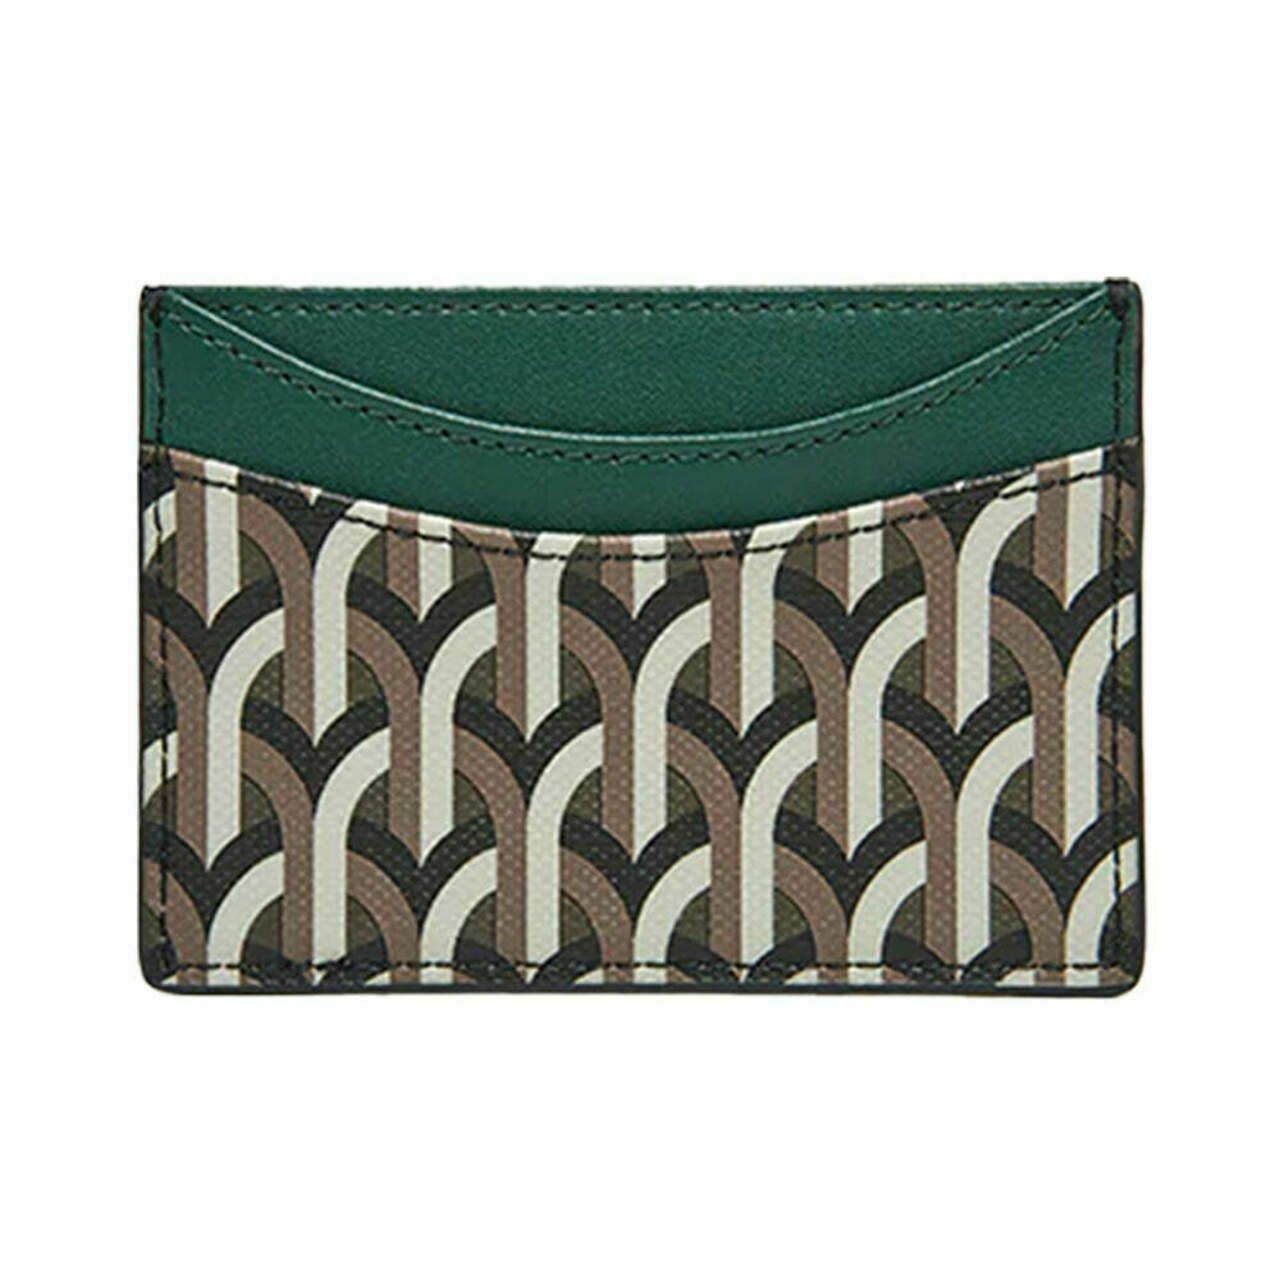 Dellest Everyday Cardcase Moss Green